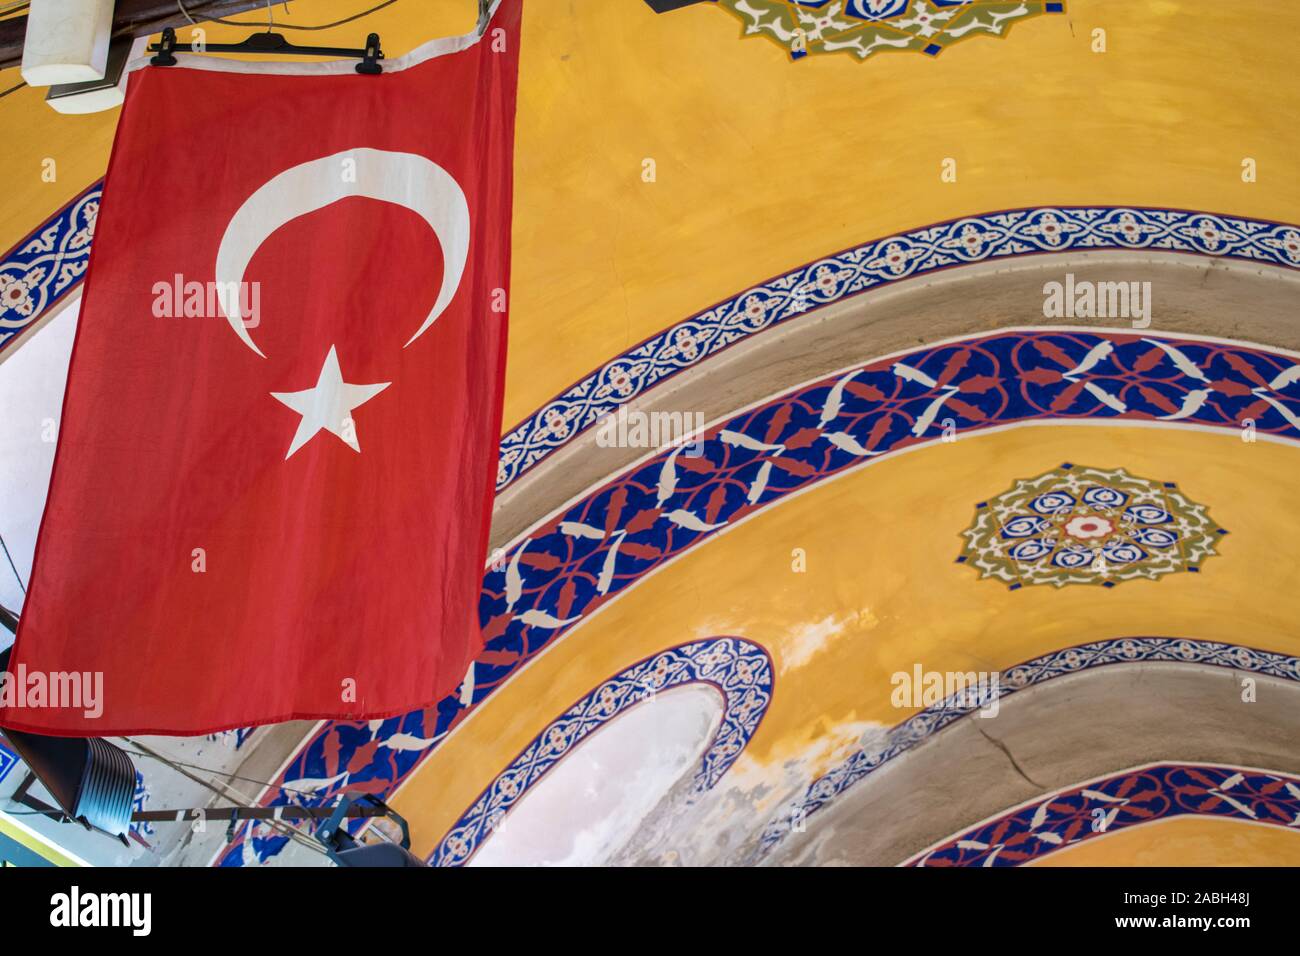 Istanbul: turkish flag and ceiling decorations in the Grand Bazaar, one of the largest and oldest covered markets in the world with over 4,000 shops Stock Photo